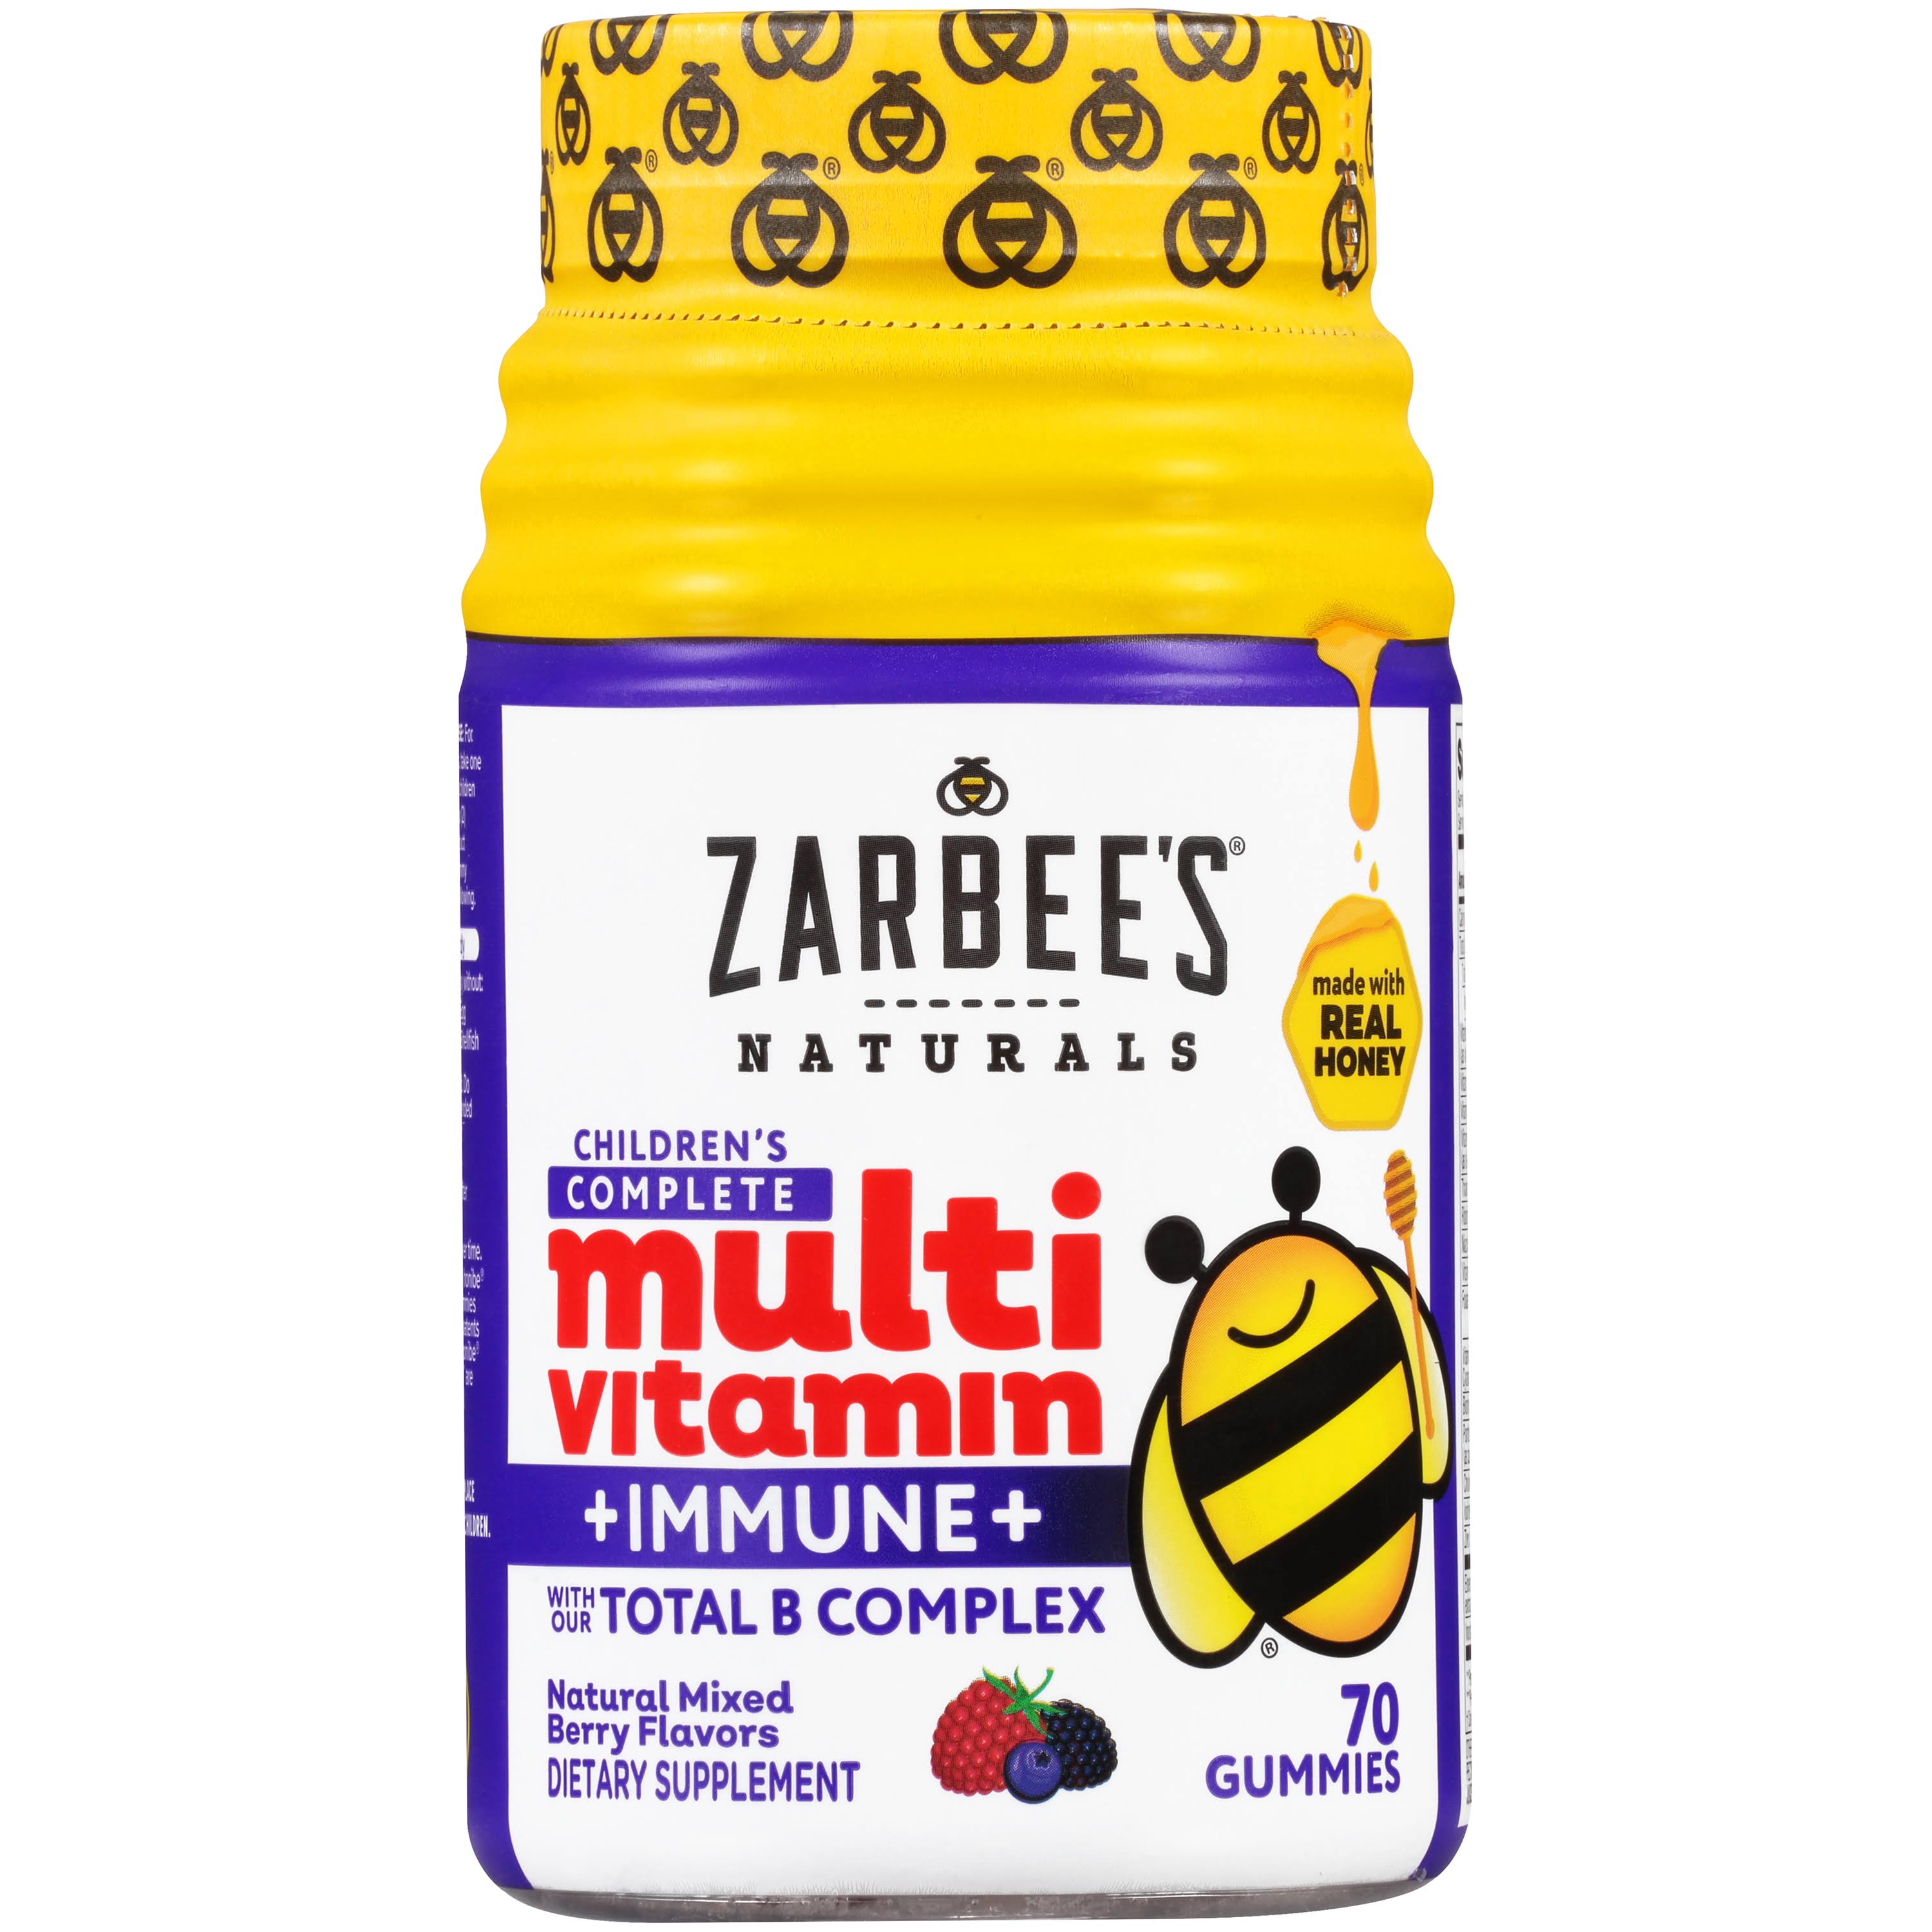 Zarbee's Naturals Children's Complete Multivitamin and Immune Gummies with Our Total B Complex and Essential Vitamins Supplement - Sweetened with Honey, Natural Mixed Berry, 70ct